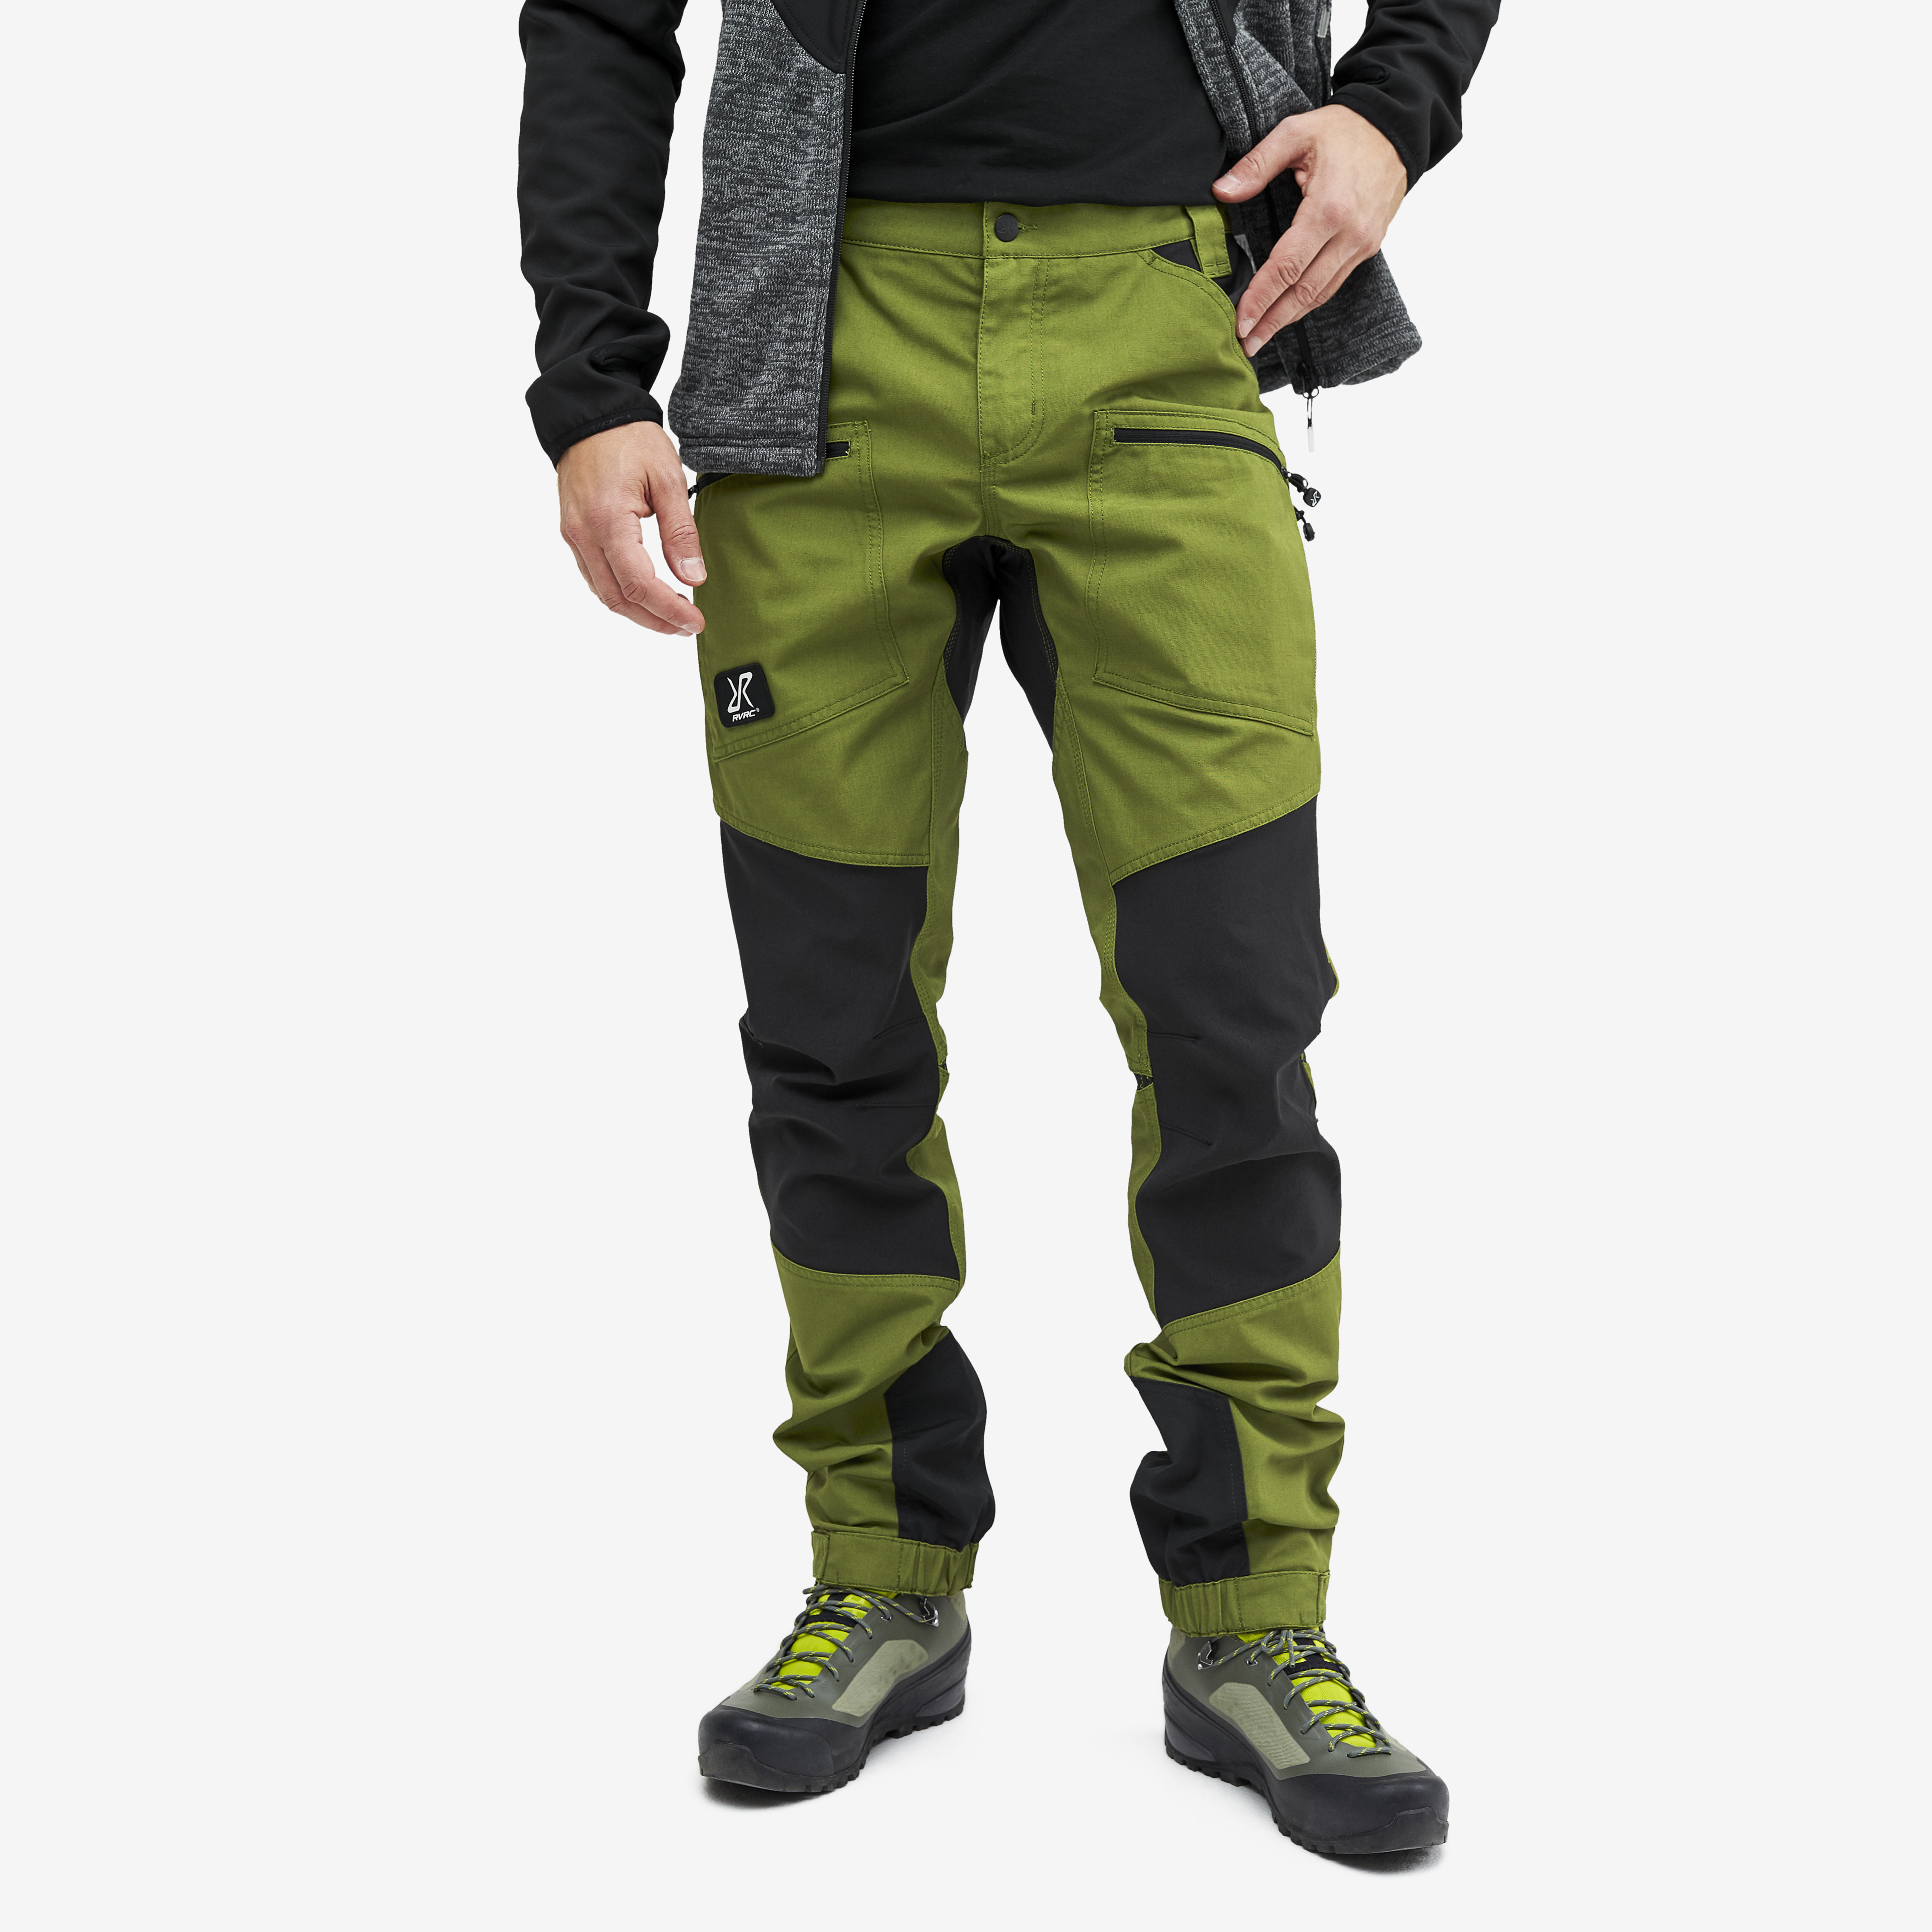 Nordwand Pro Pants Cactus Green Homme